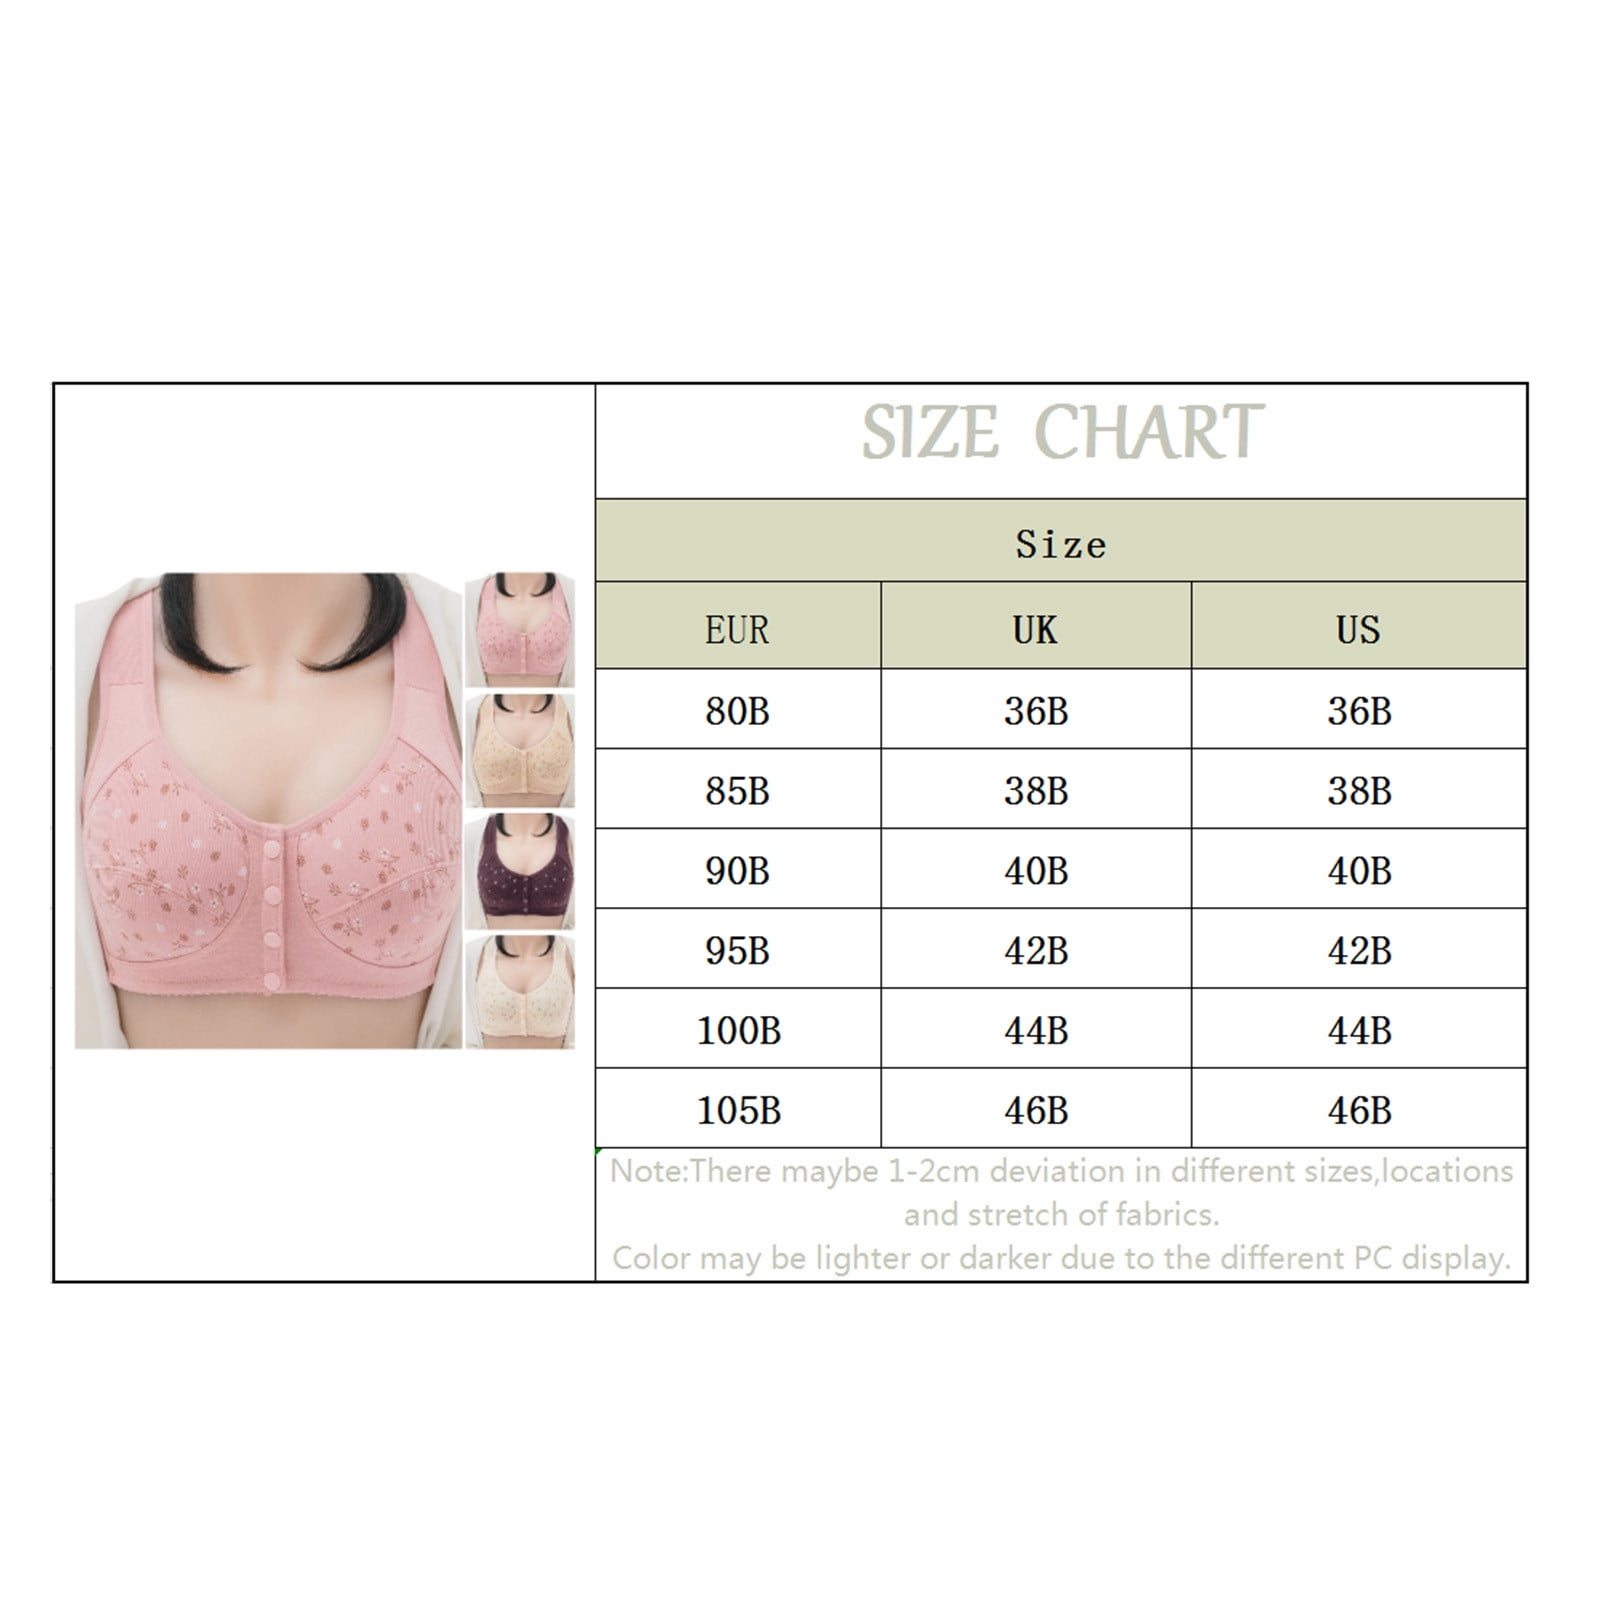 LEEy-world Lingerie for Women Women's Plus Size Minimizer Bra for Large Bust  Full Coverage Figure Non Padded Wirefree,Beige 